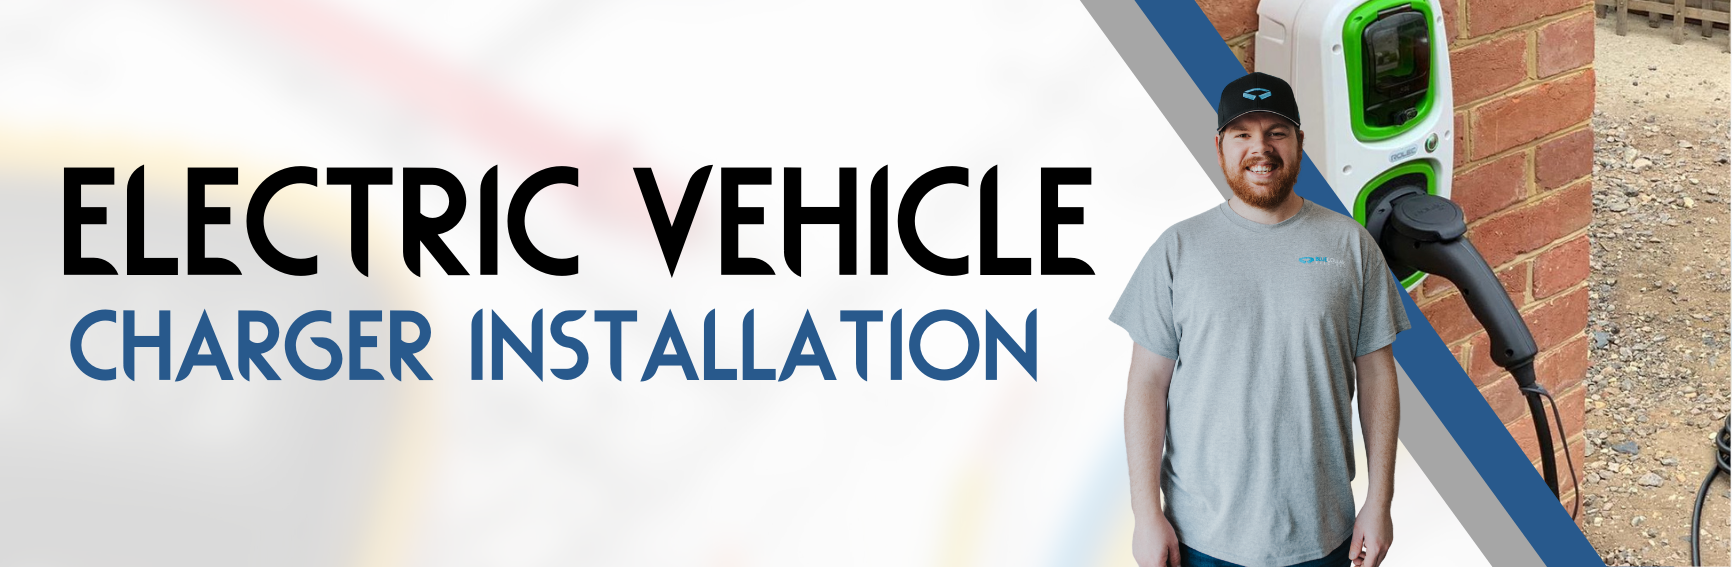 Electric Vehicle Charge Installation - Blue Collar Electric